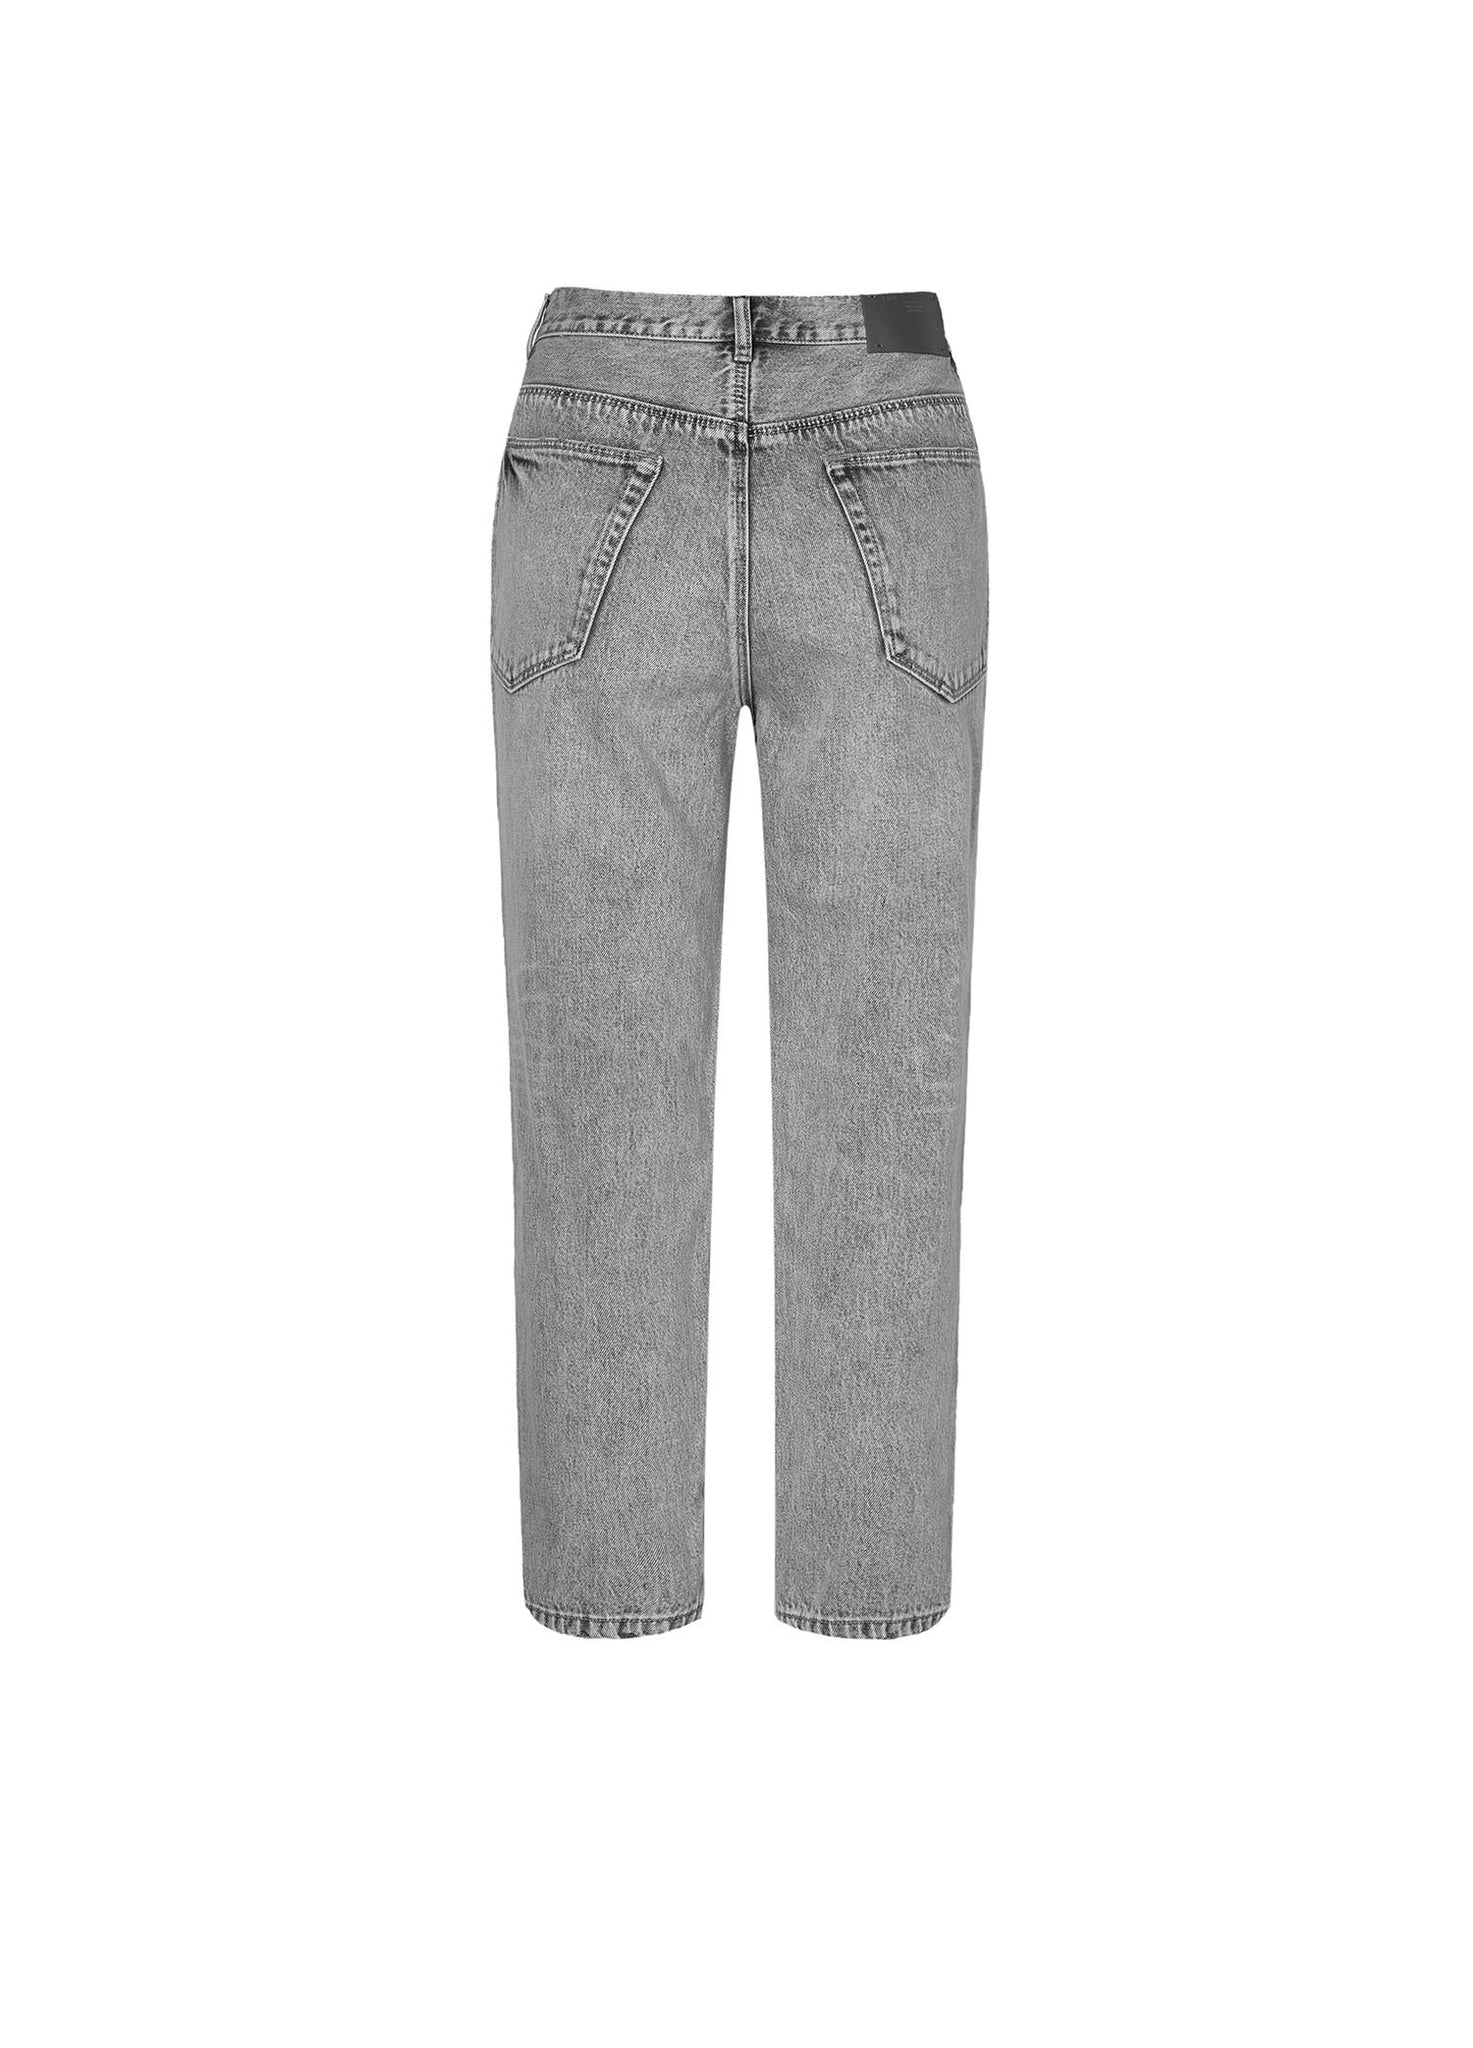 Jeans / JNBY Slim Fit Cropped Jeans (100% Cotton)